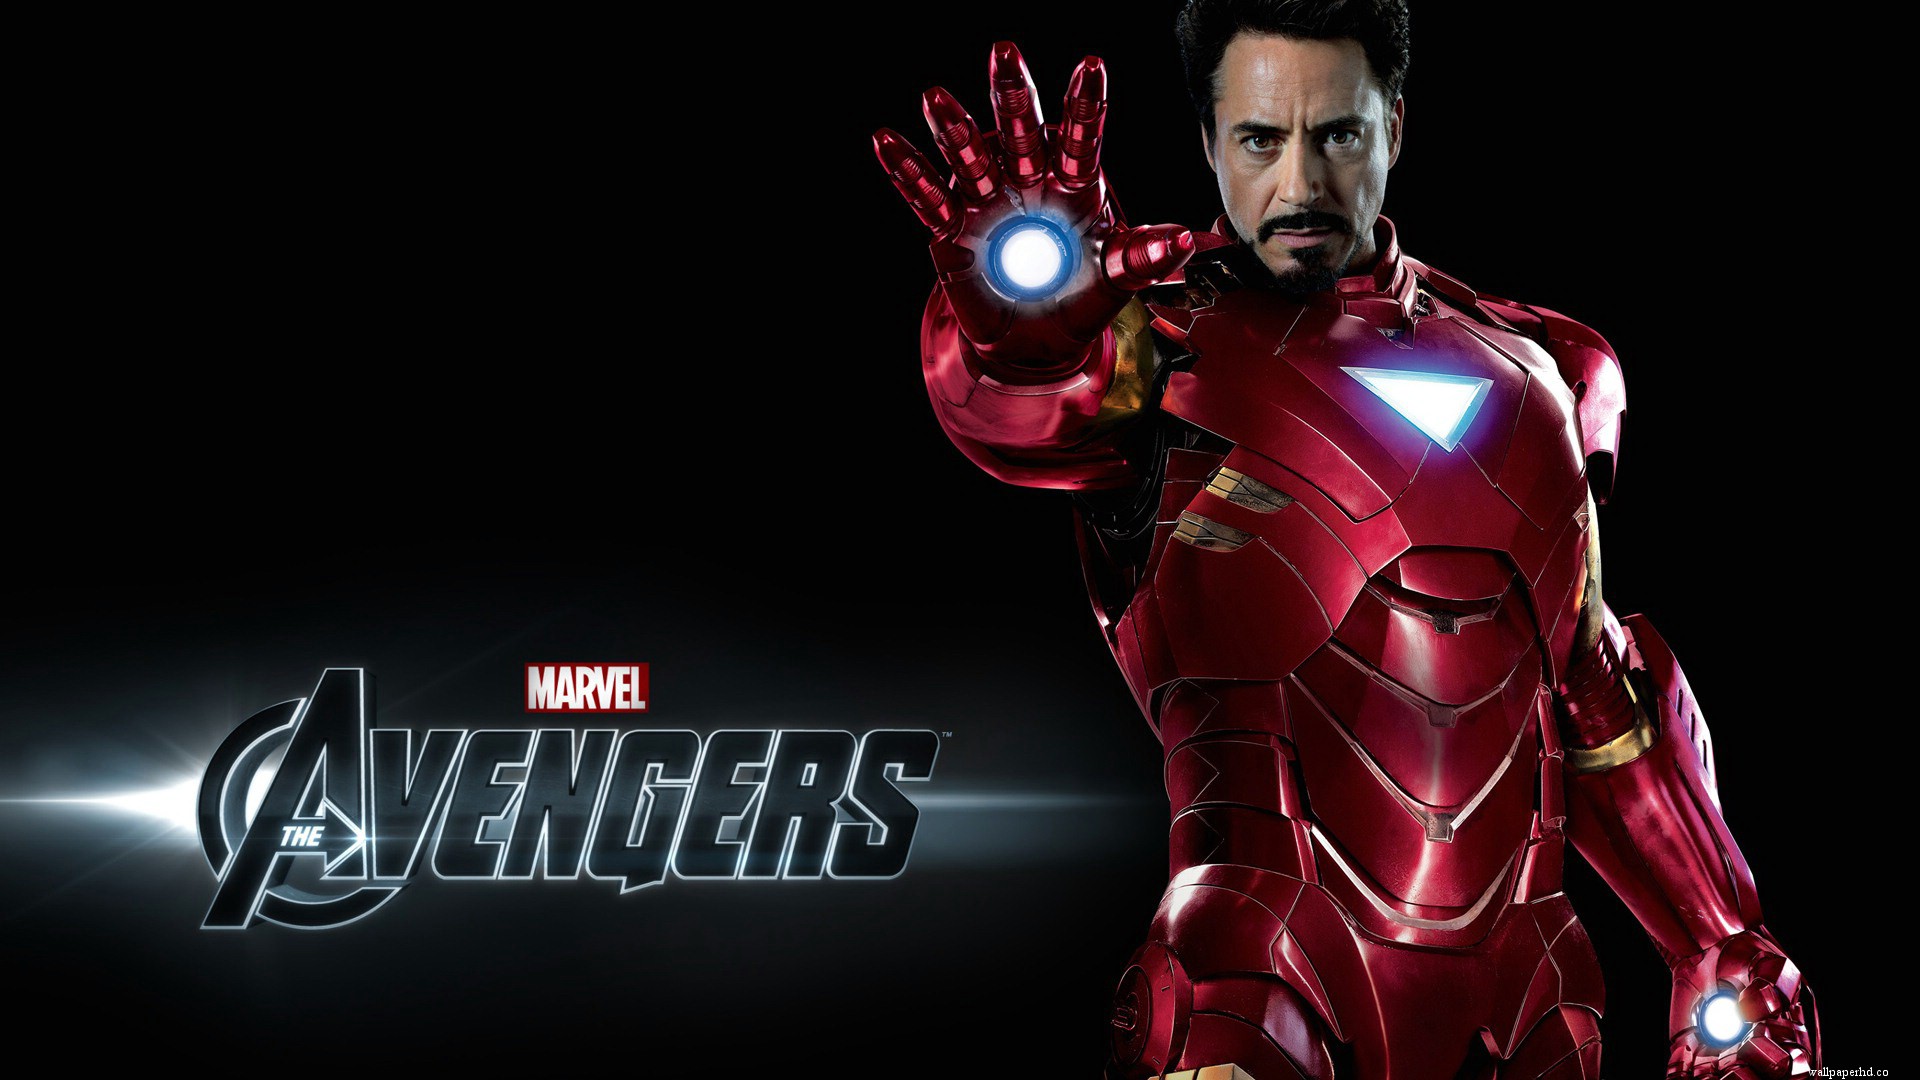 The Avengers Wallpapers HD Movie Wallpapers The Avengers Wallpapers